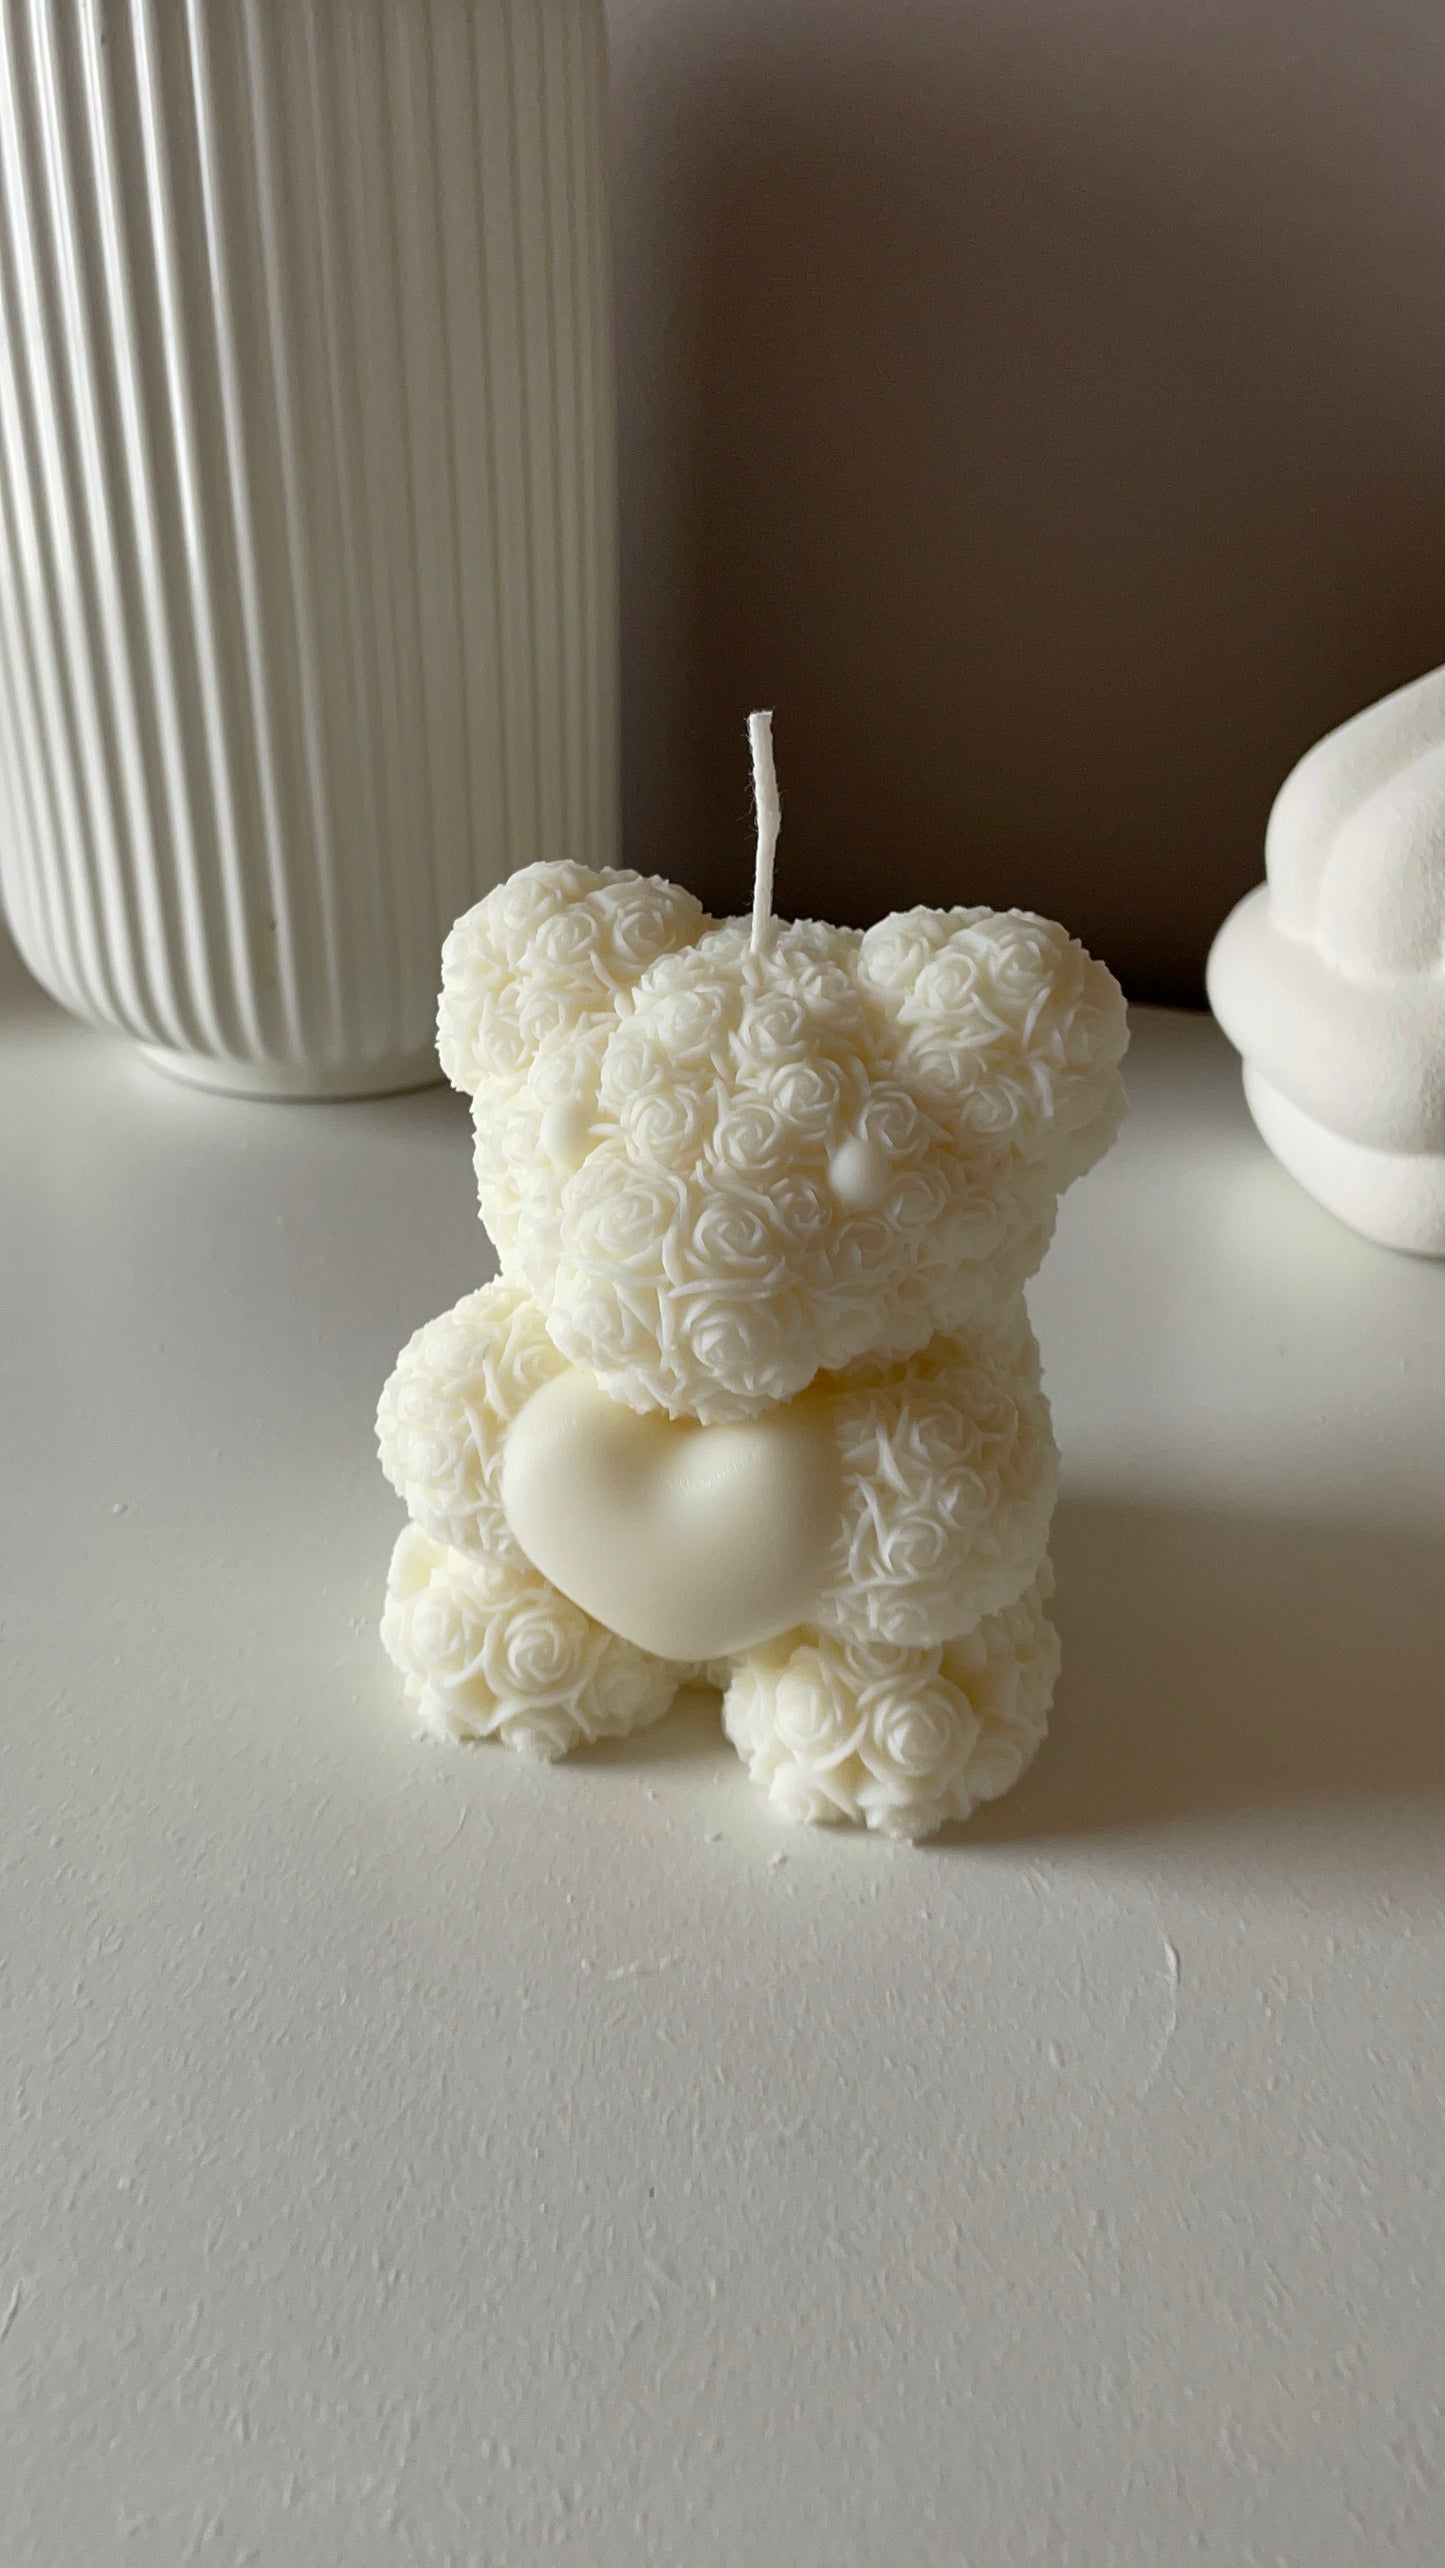 The Rose Teddy Bear Candle